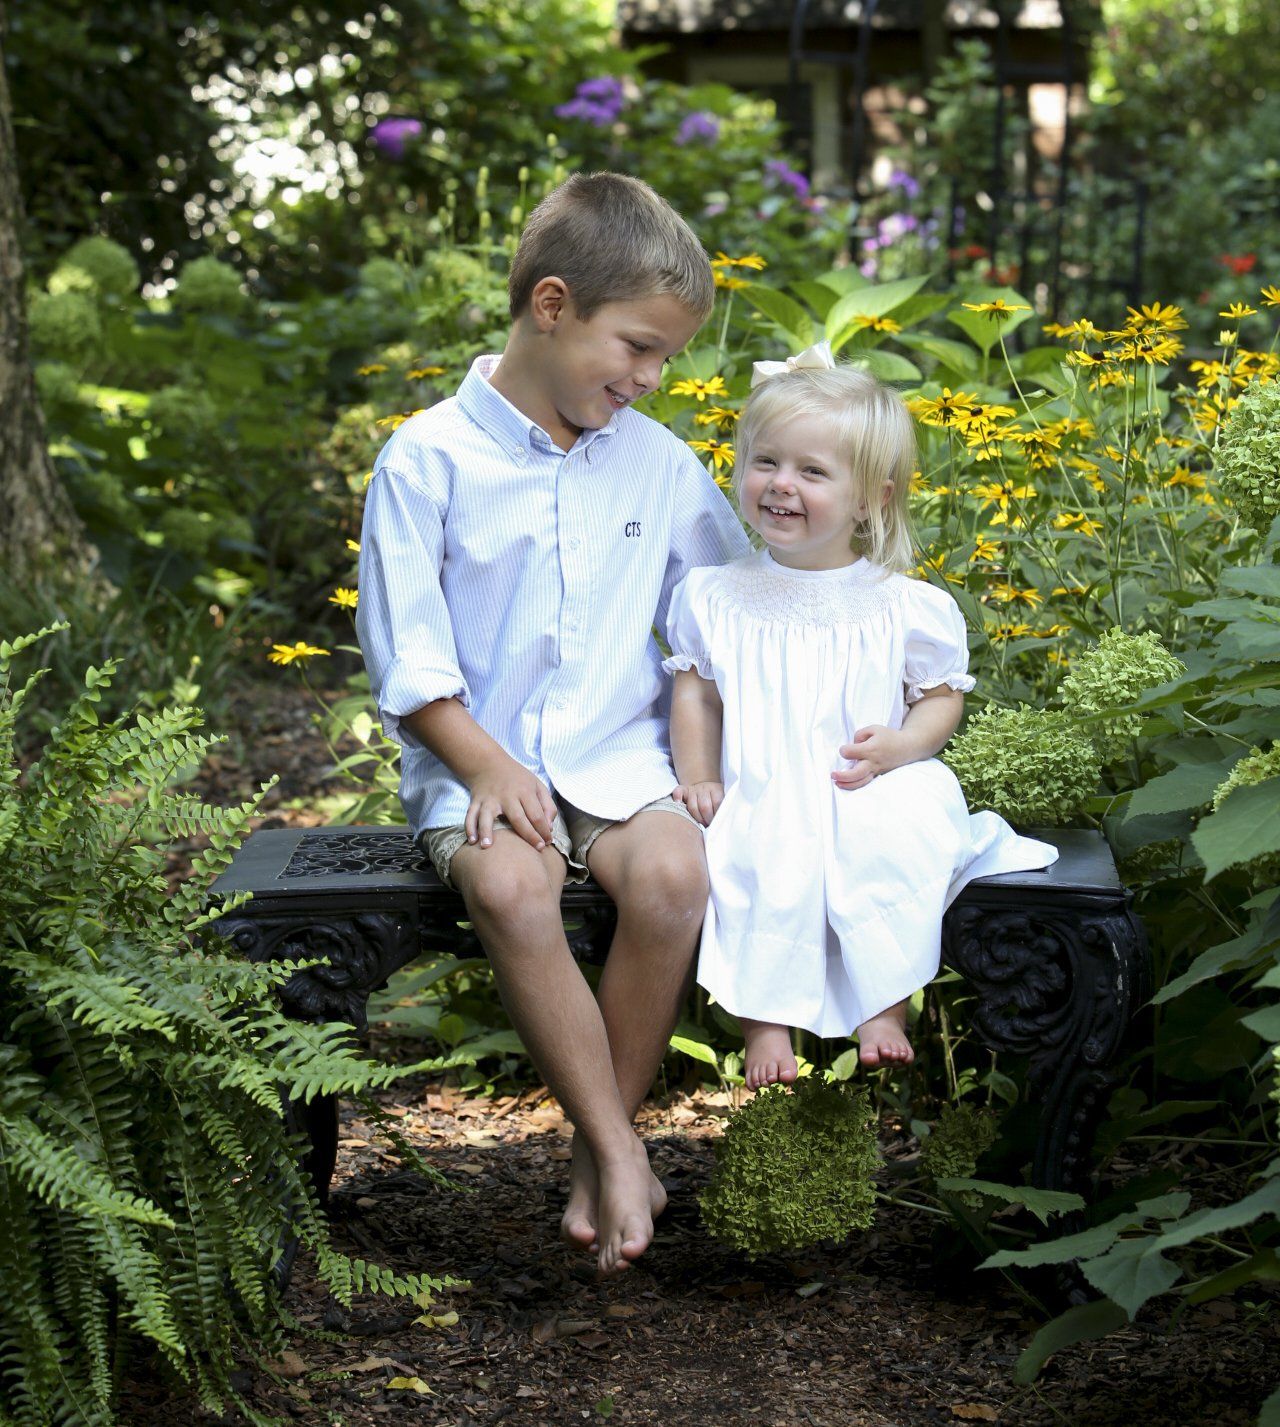 Outdoor portrait of brother and sister in garden